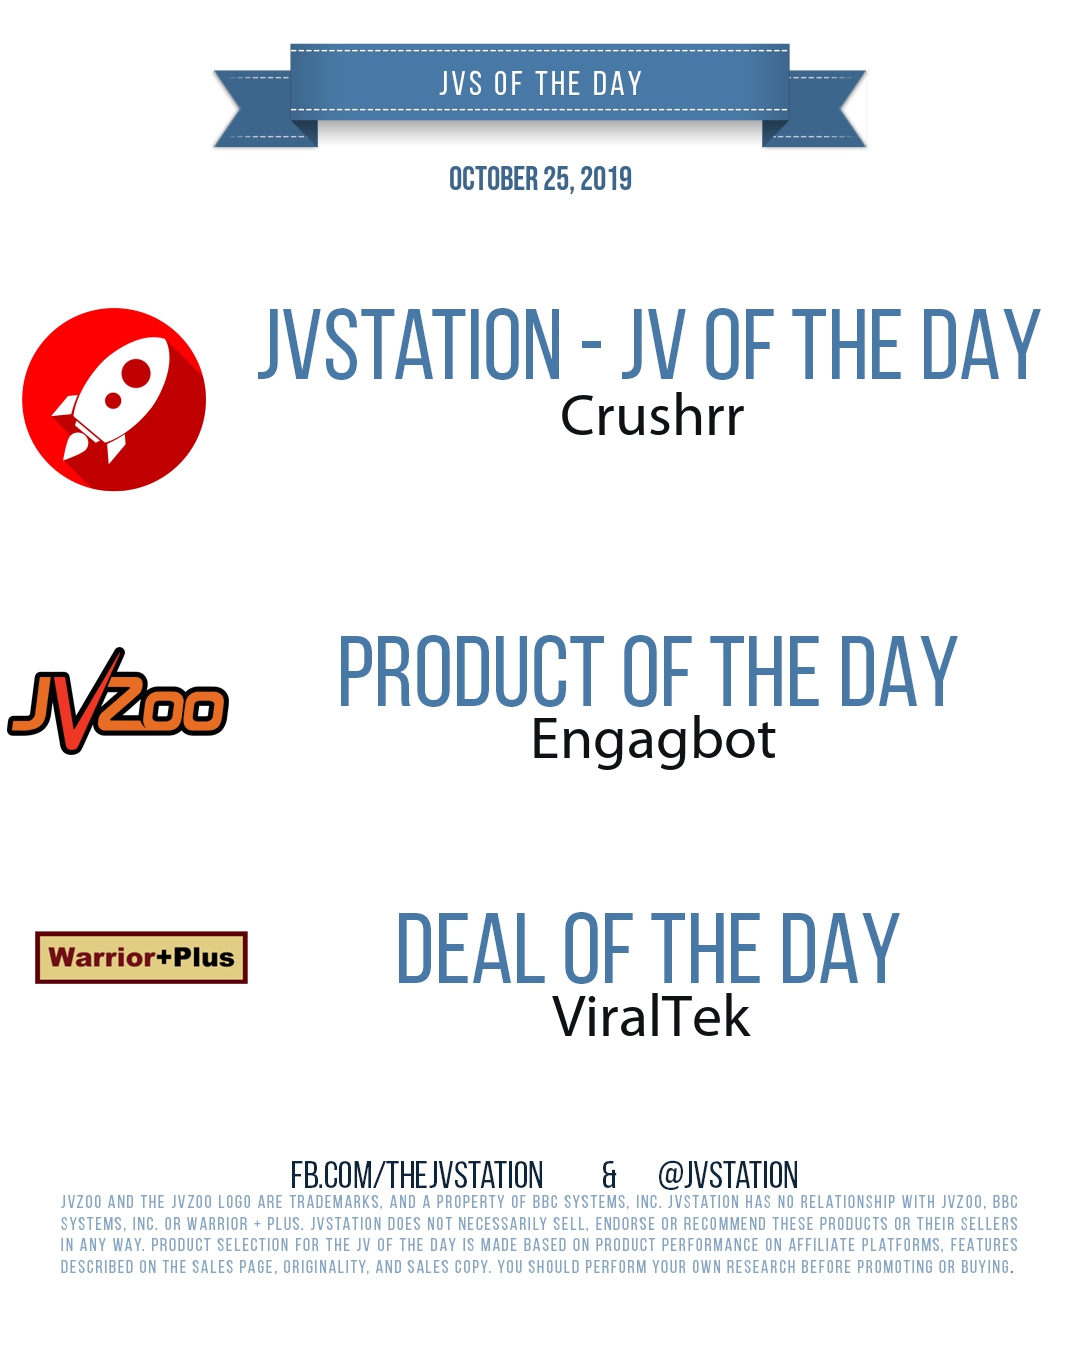 JVs of the day - October 25, 2019